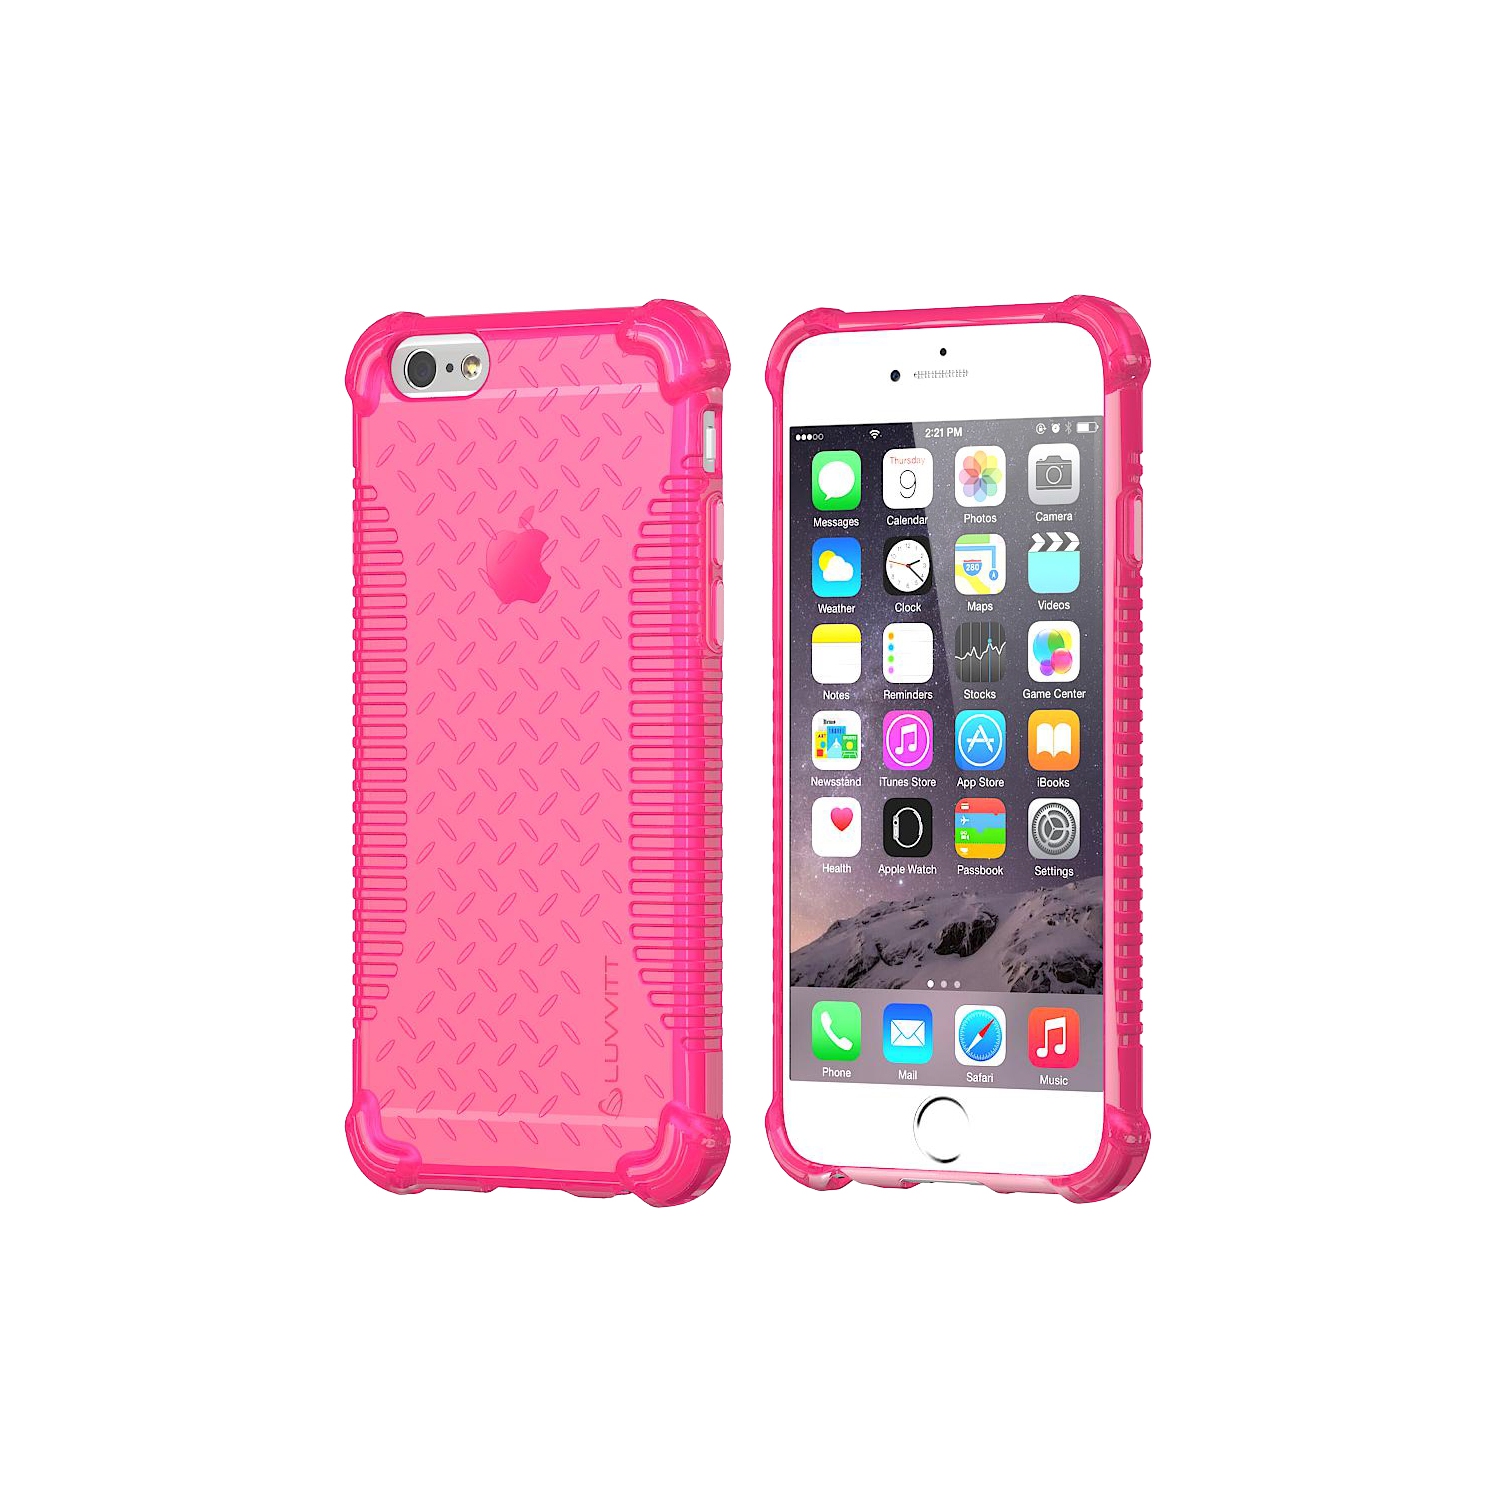 LUVVITT CLEAR GRIP iPhone 6 / 6S Case | Soft TPU Rubber Back Cover